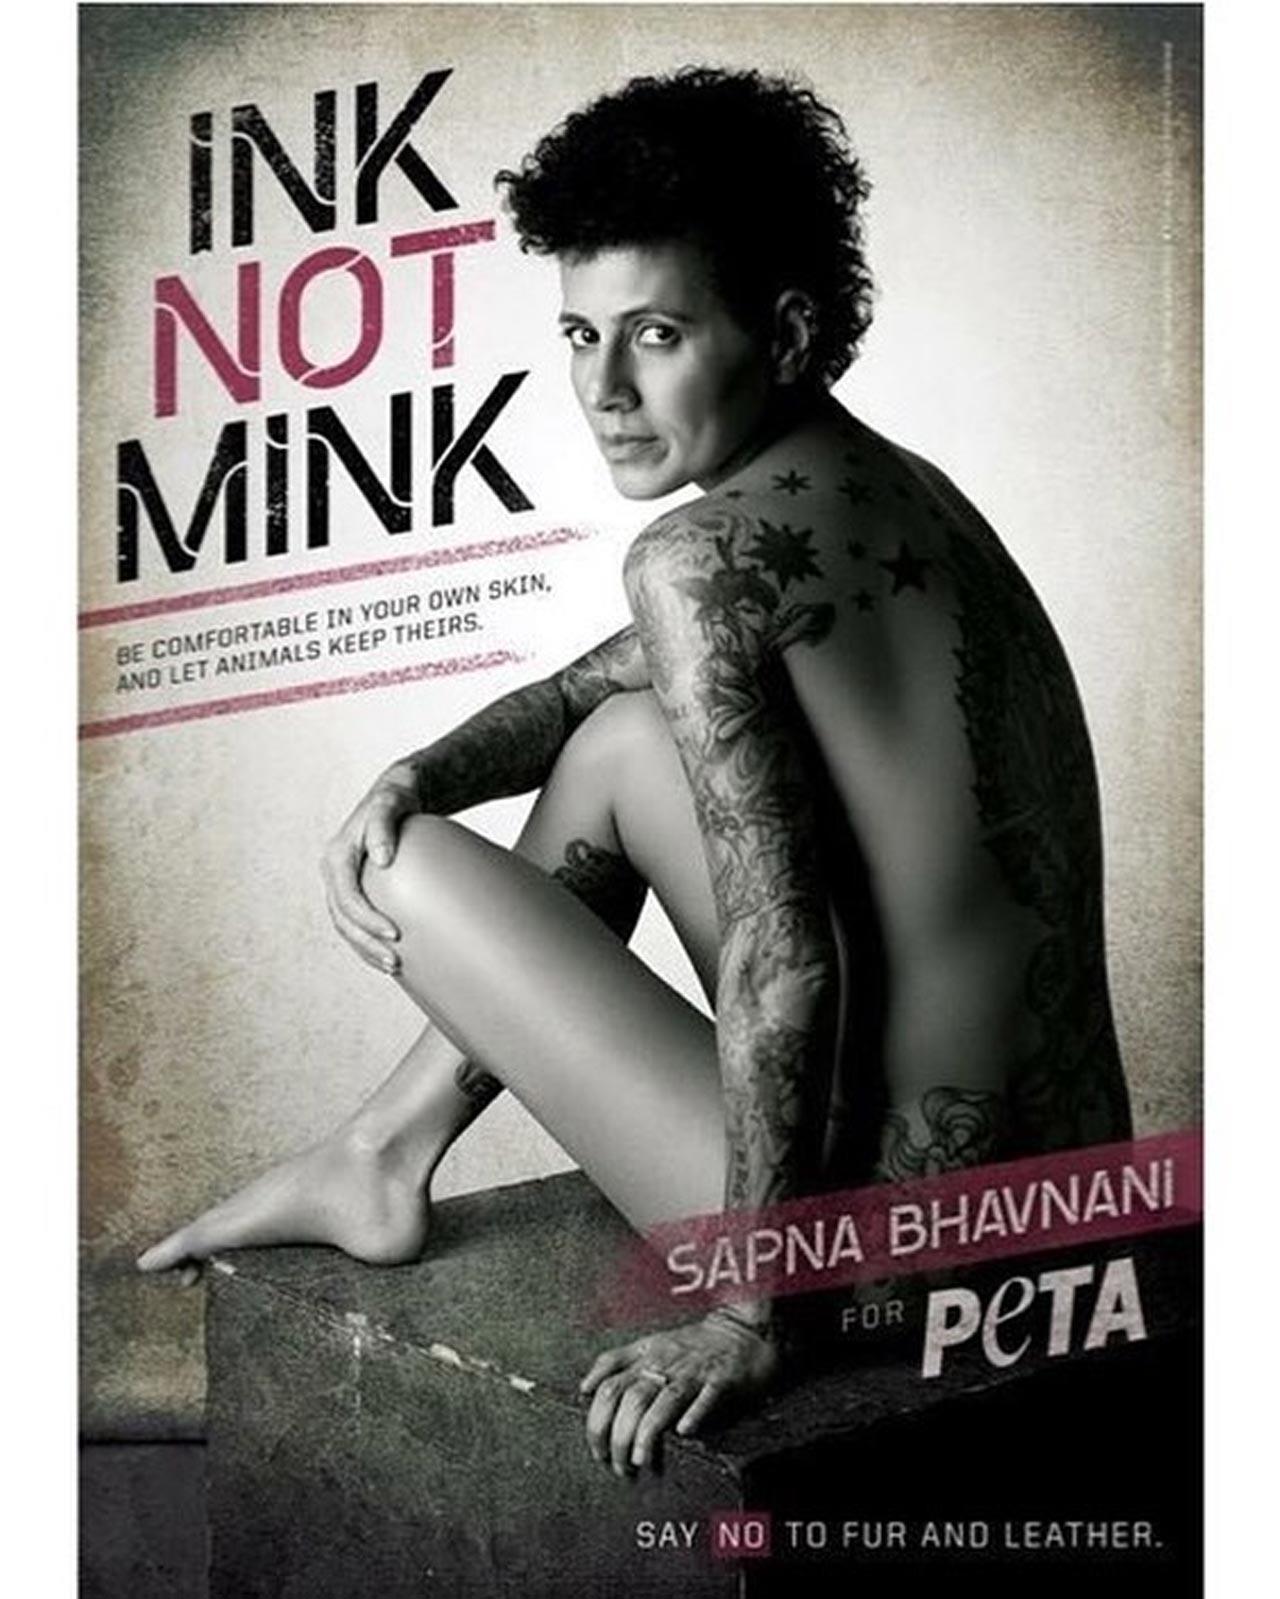 Sapna Bhavnani
Sapna Bhavnani, a celebrity hairstylist, rose to prominence after appearing on the controversial reality show 'Bigg Boss 6'. But did you know that she stripped it all off for a PETA advertisement? (Photo courtesy: Sapna Bhavnani's Instagram account)